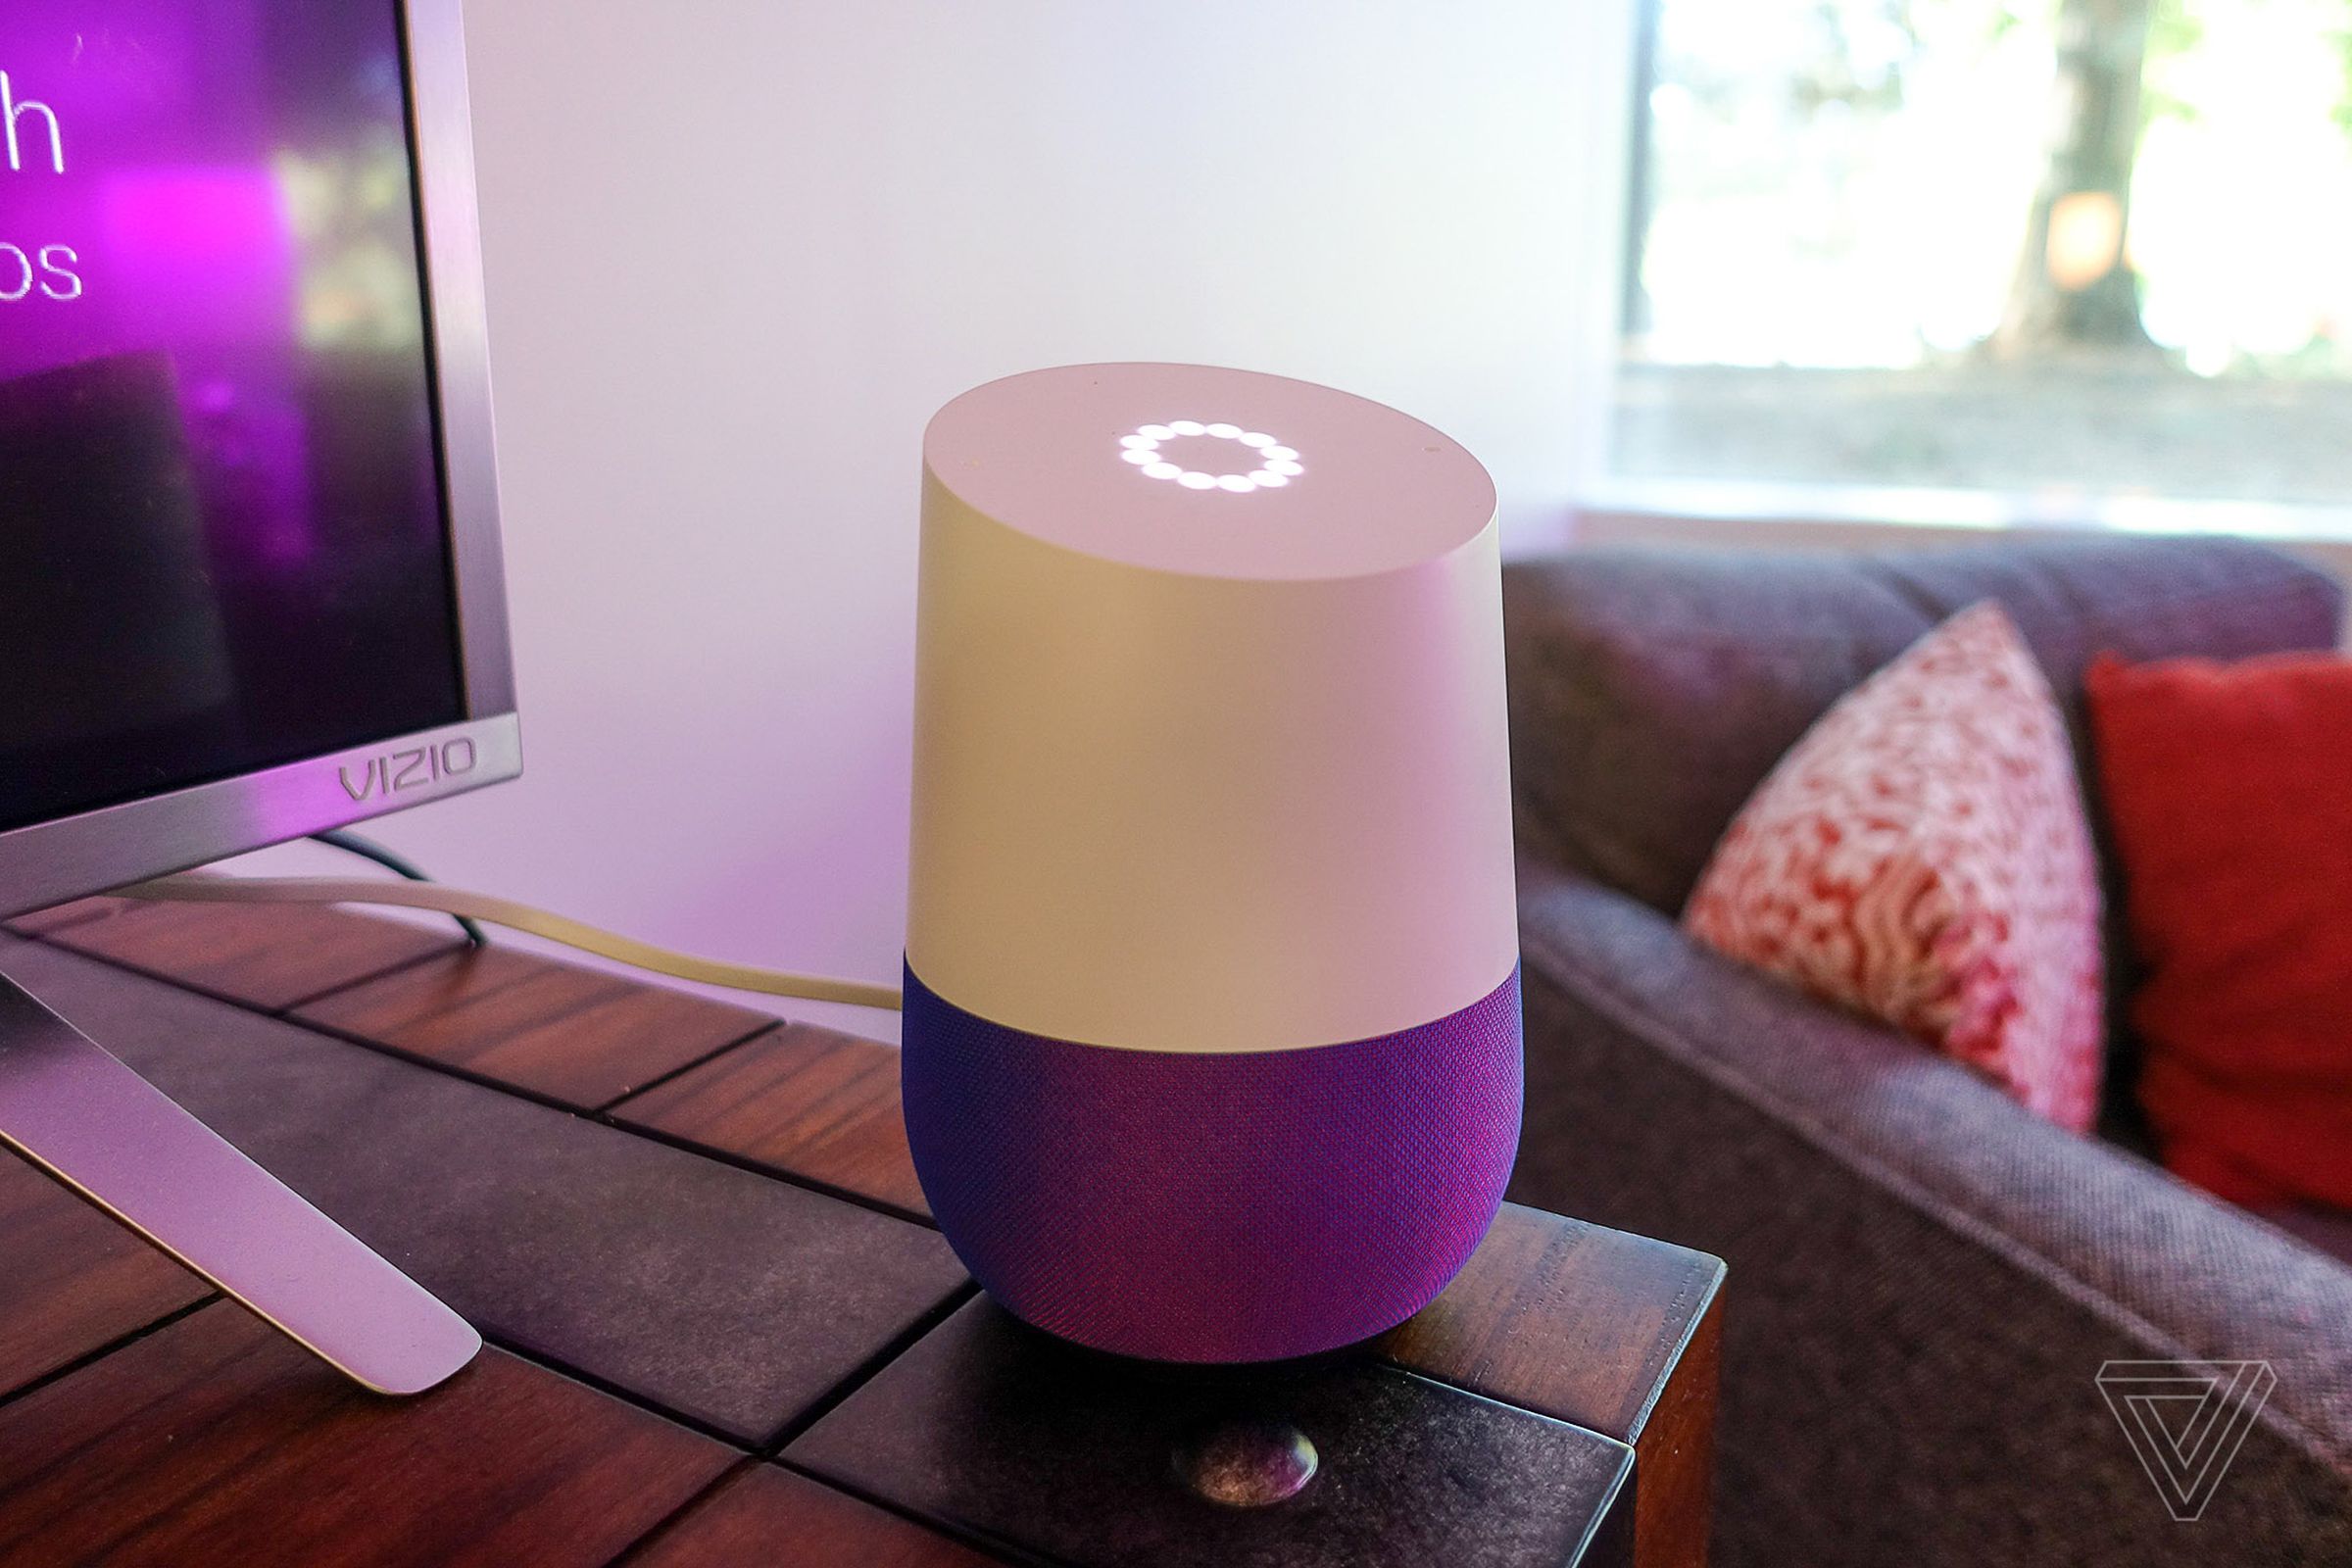 Google is already using DeepMind’s tech to power the voice of Google Assistant.